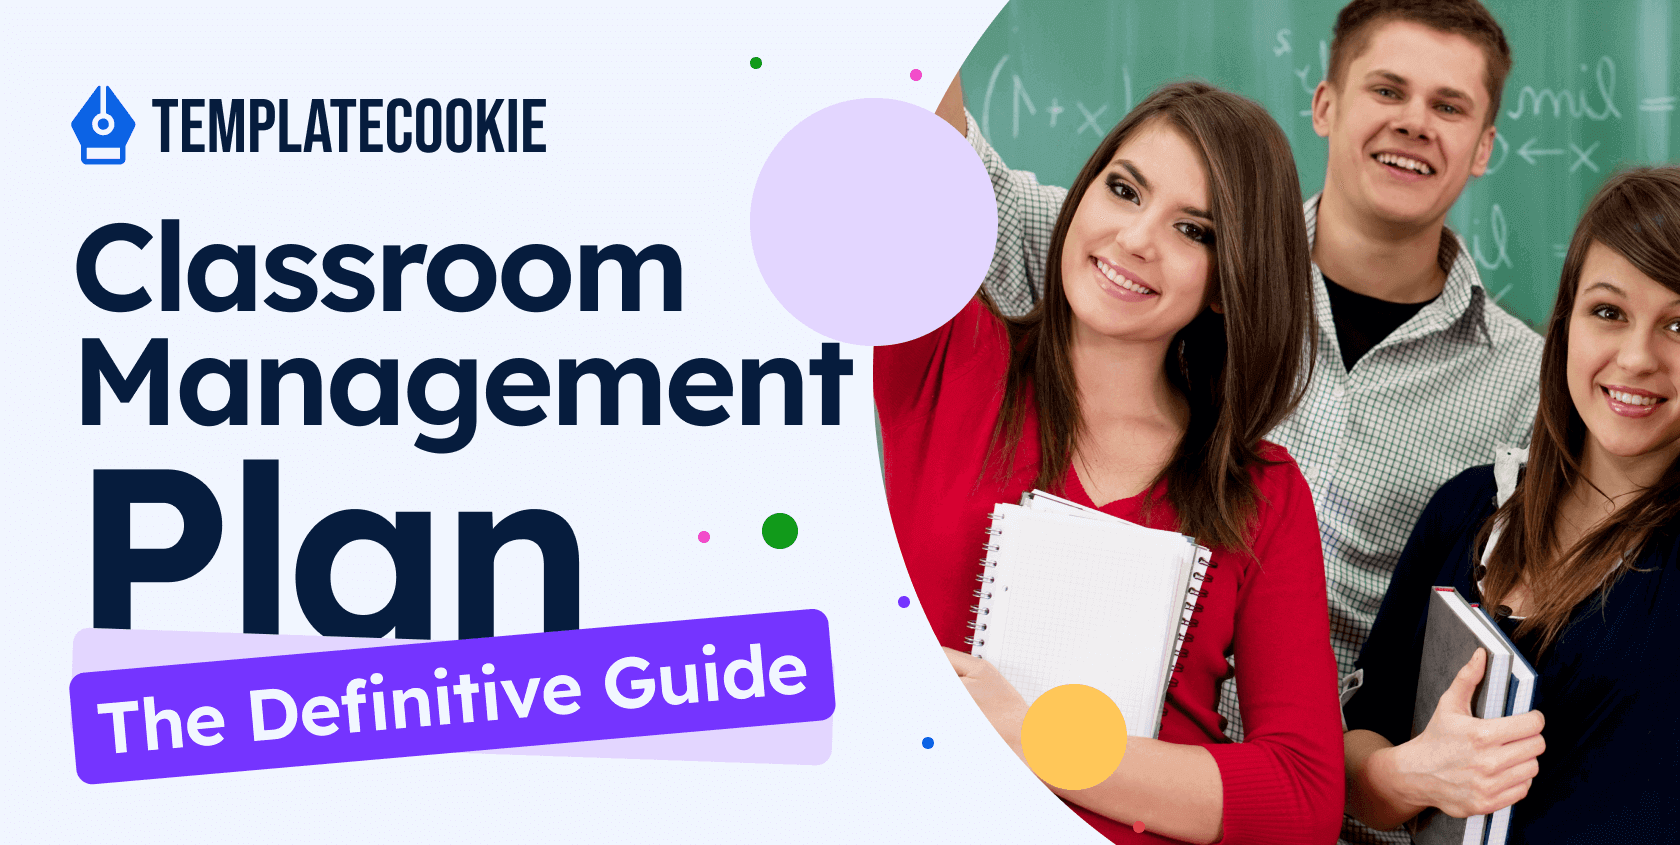 Classroom Management Plan - The Definitive Guide